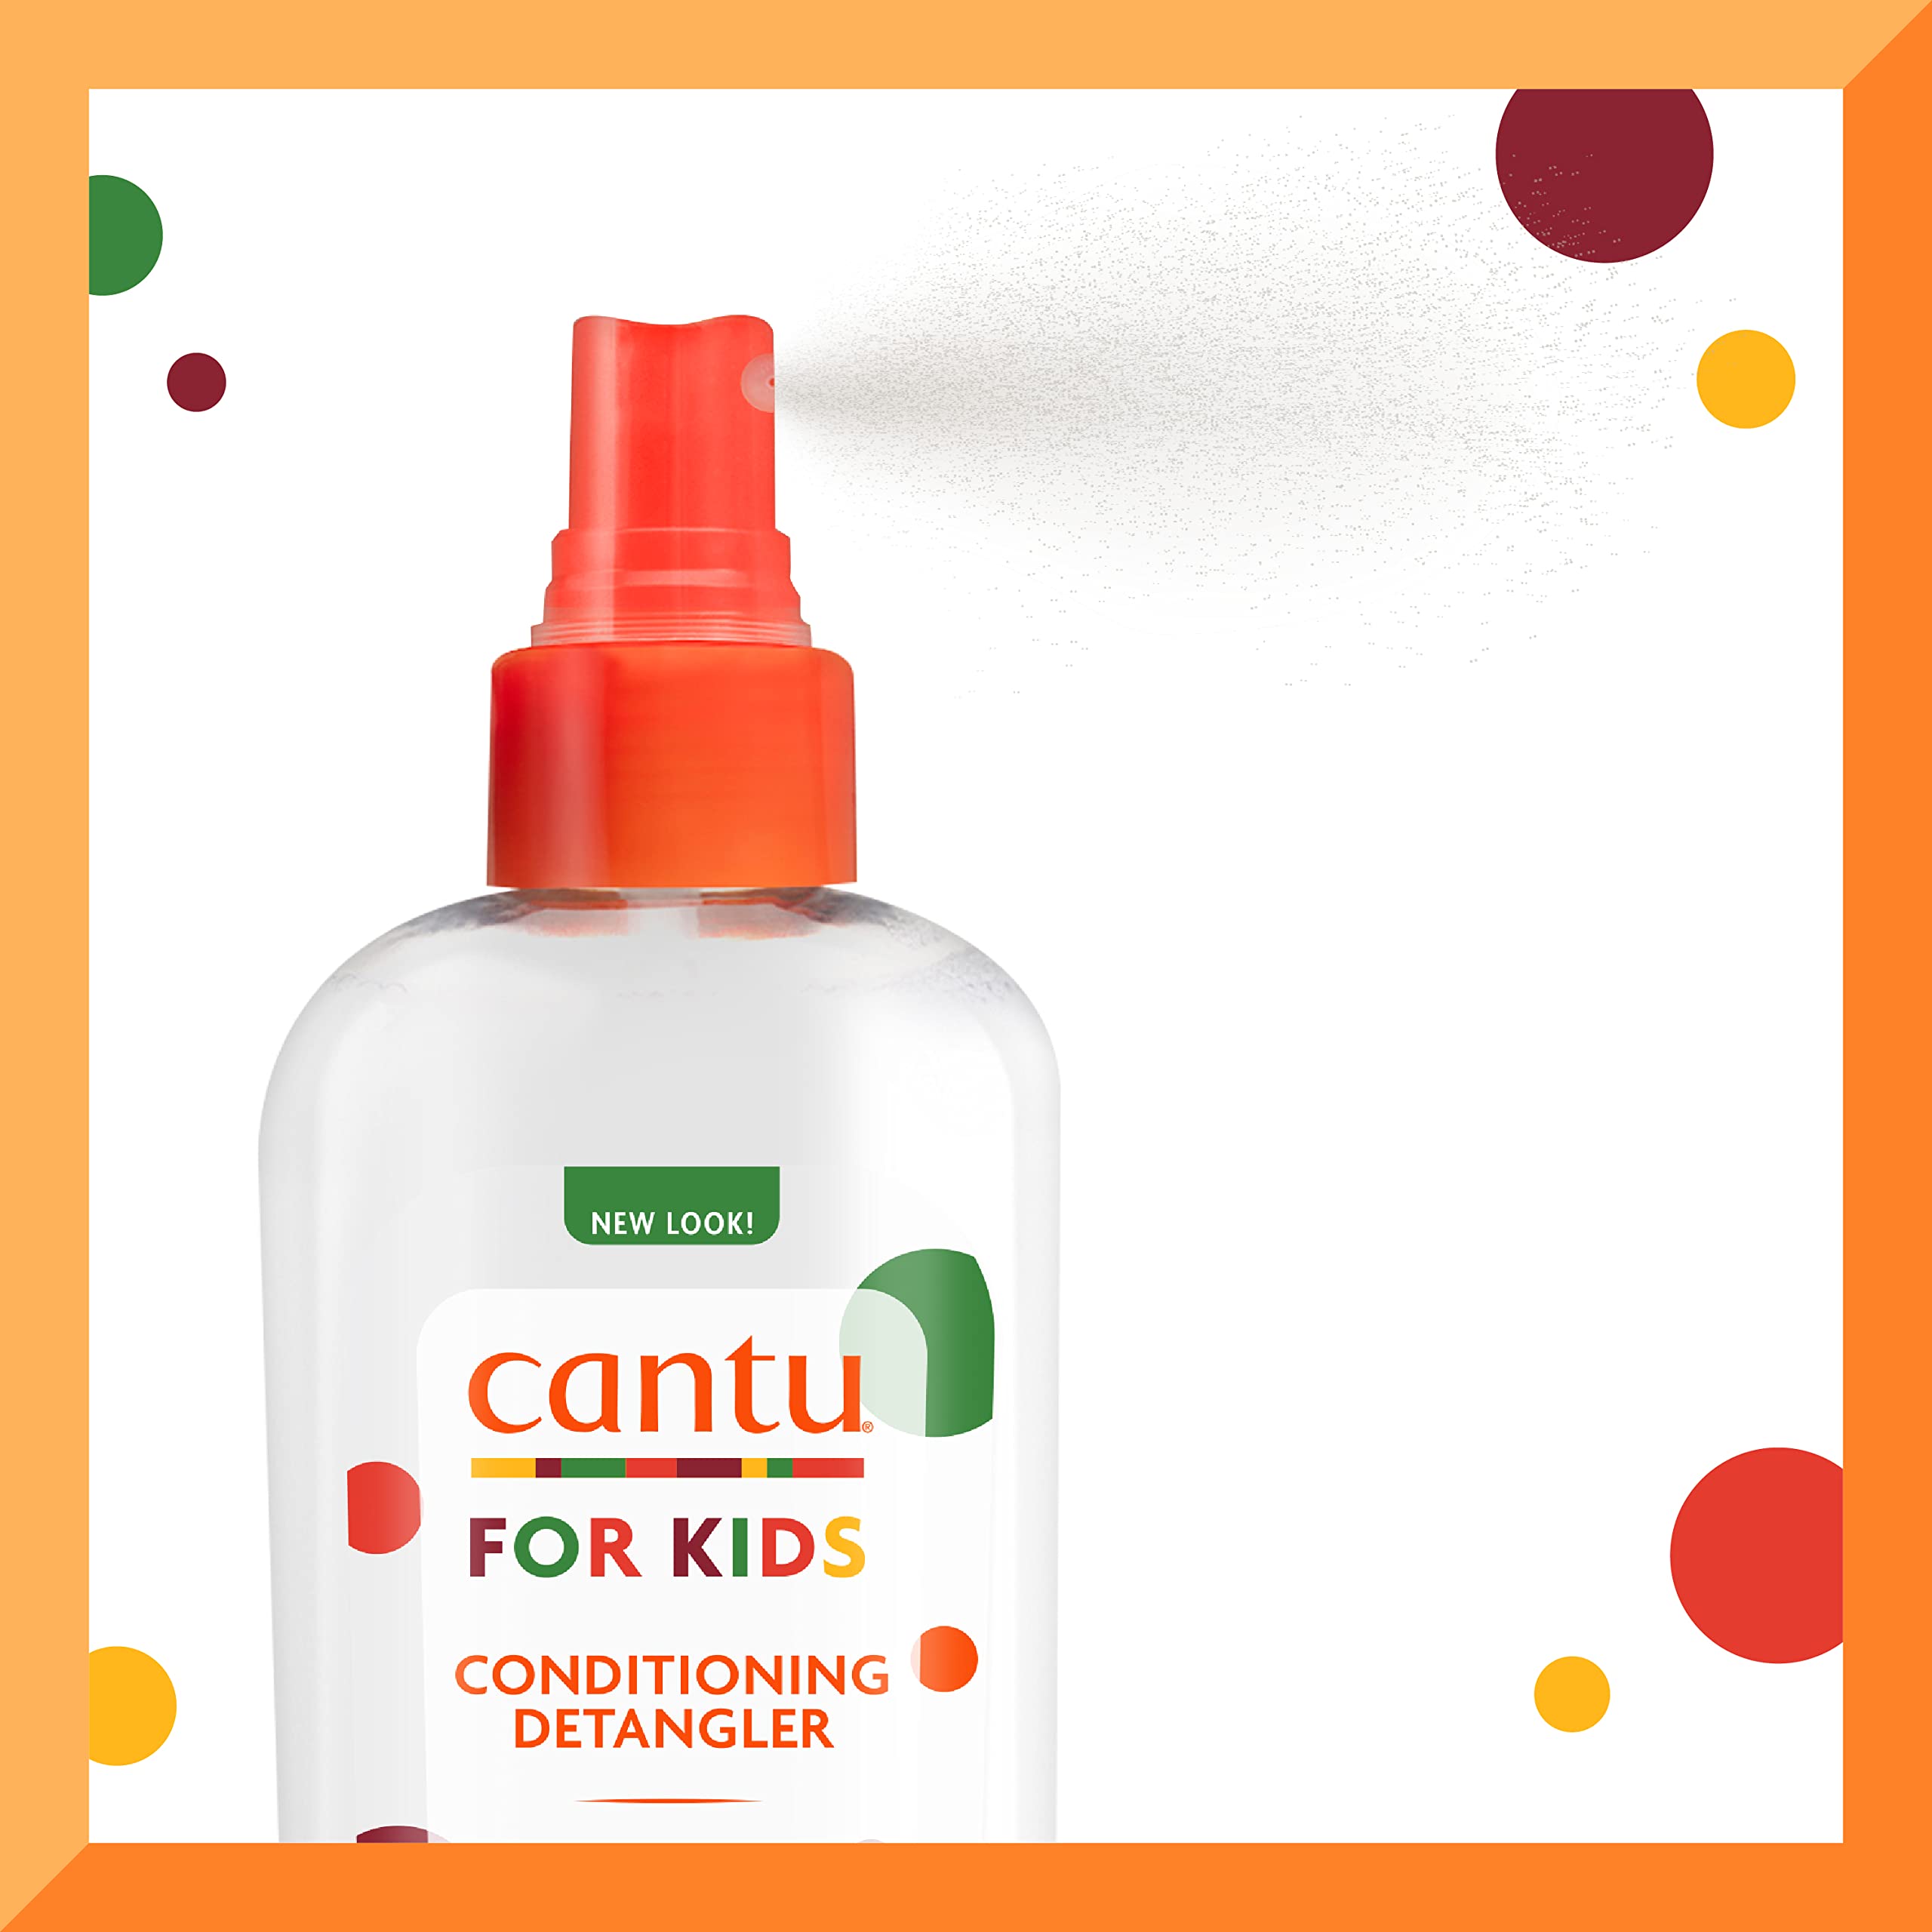 Cantu Care for Kids Paraben & Sulfate-Free Conditioning Detangler with Shea Butter, 6 fl oz (Pack of 3) (Packaging May Vary)